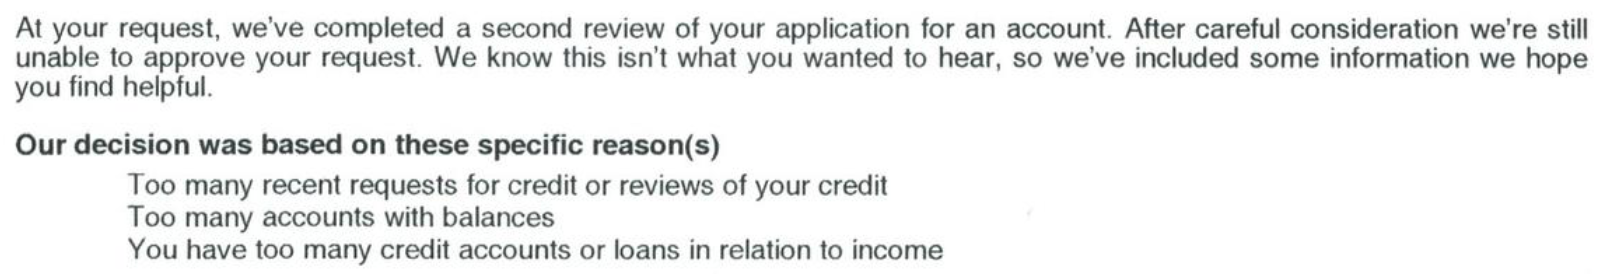 A screenshot of a letter from Chase informing the recipient that upon a second review they were still unable to open an account, due to too many recent credit inquiries, too many accounts with balances, and too many credit accounts or loans in relation to income.